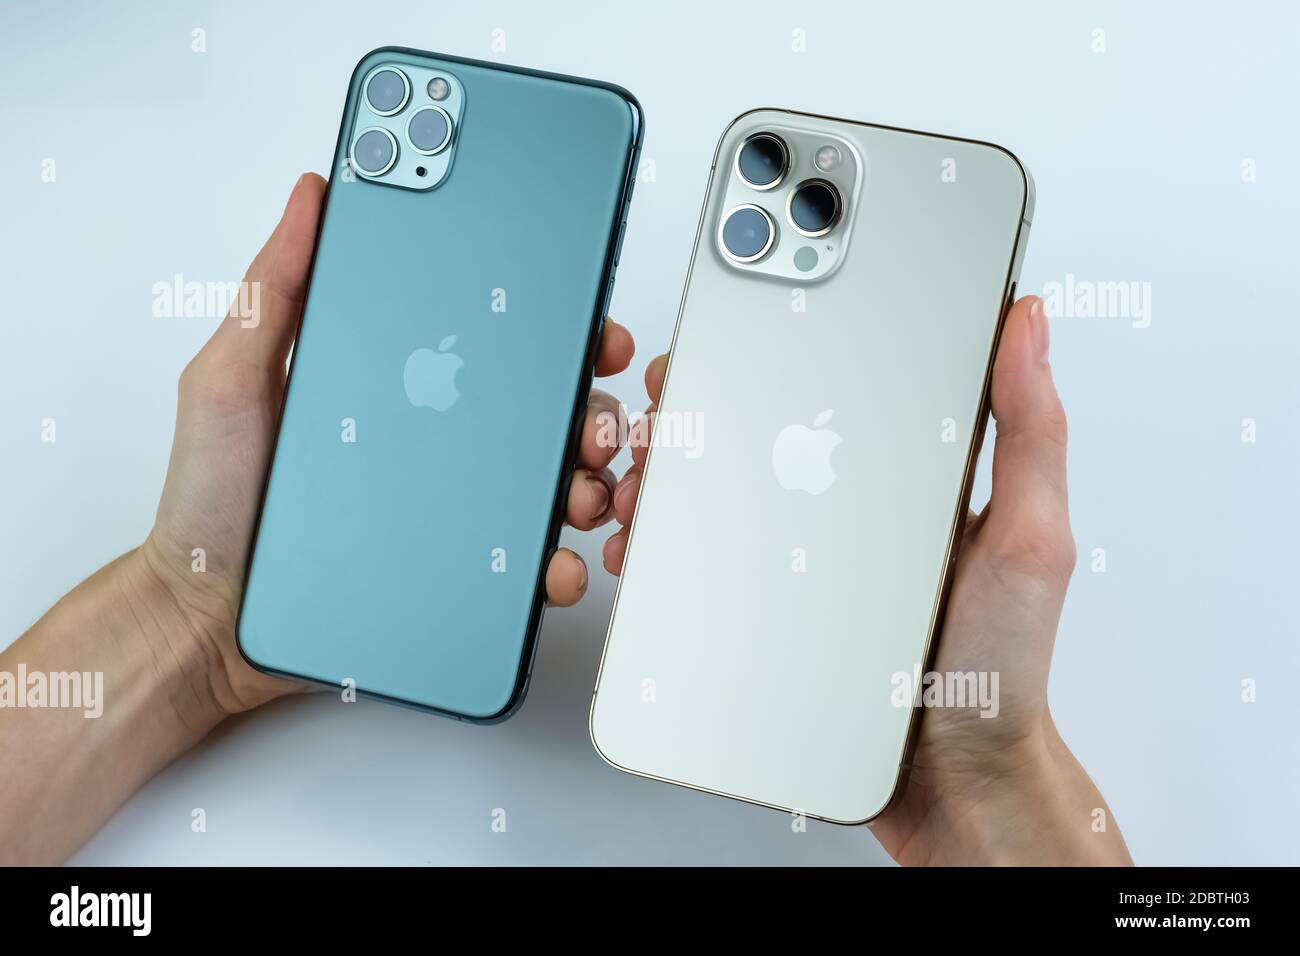 Iphone 12 Pro Max In Gold Next To Iphone 11 Pro Max In Midnight Green Color Stock Photo Alamy